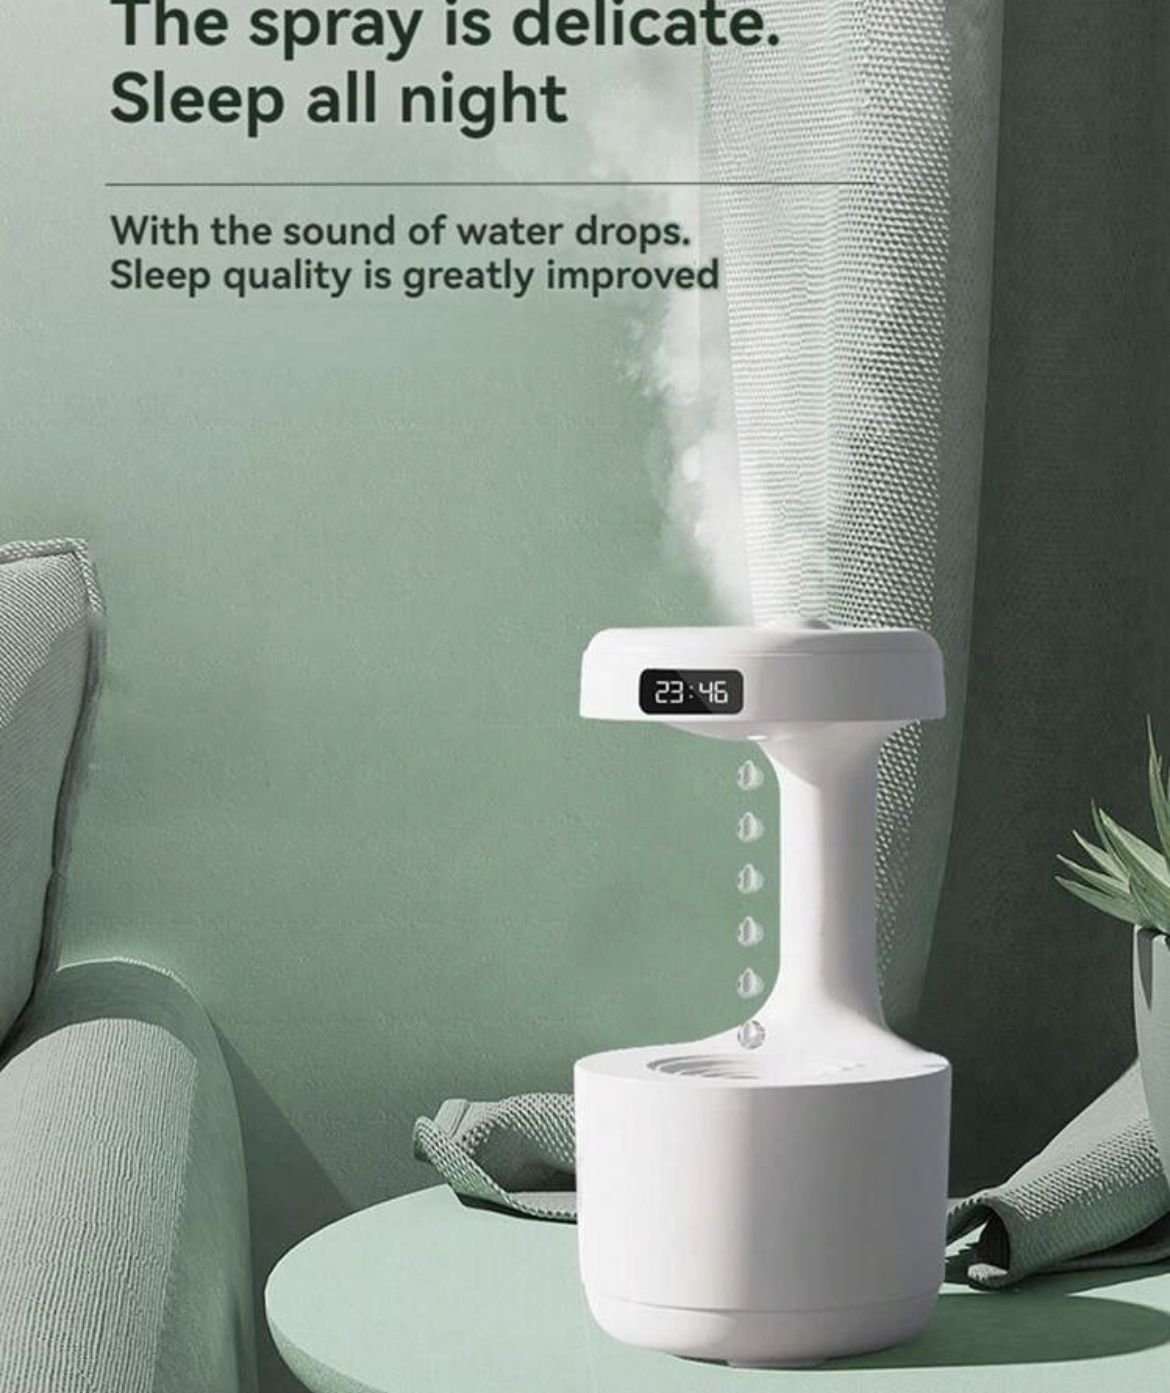 800ml Anti-Gravity Humidifier With Reverse Water Dropping For Office, Home, Bedroom, Silent Large Mist Small Spray Humidifier